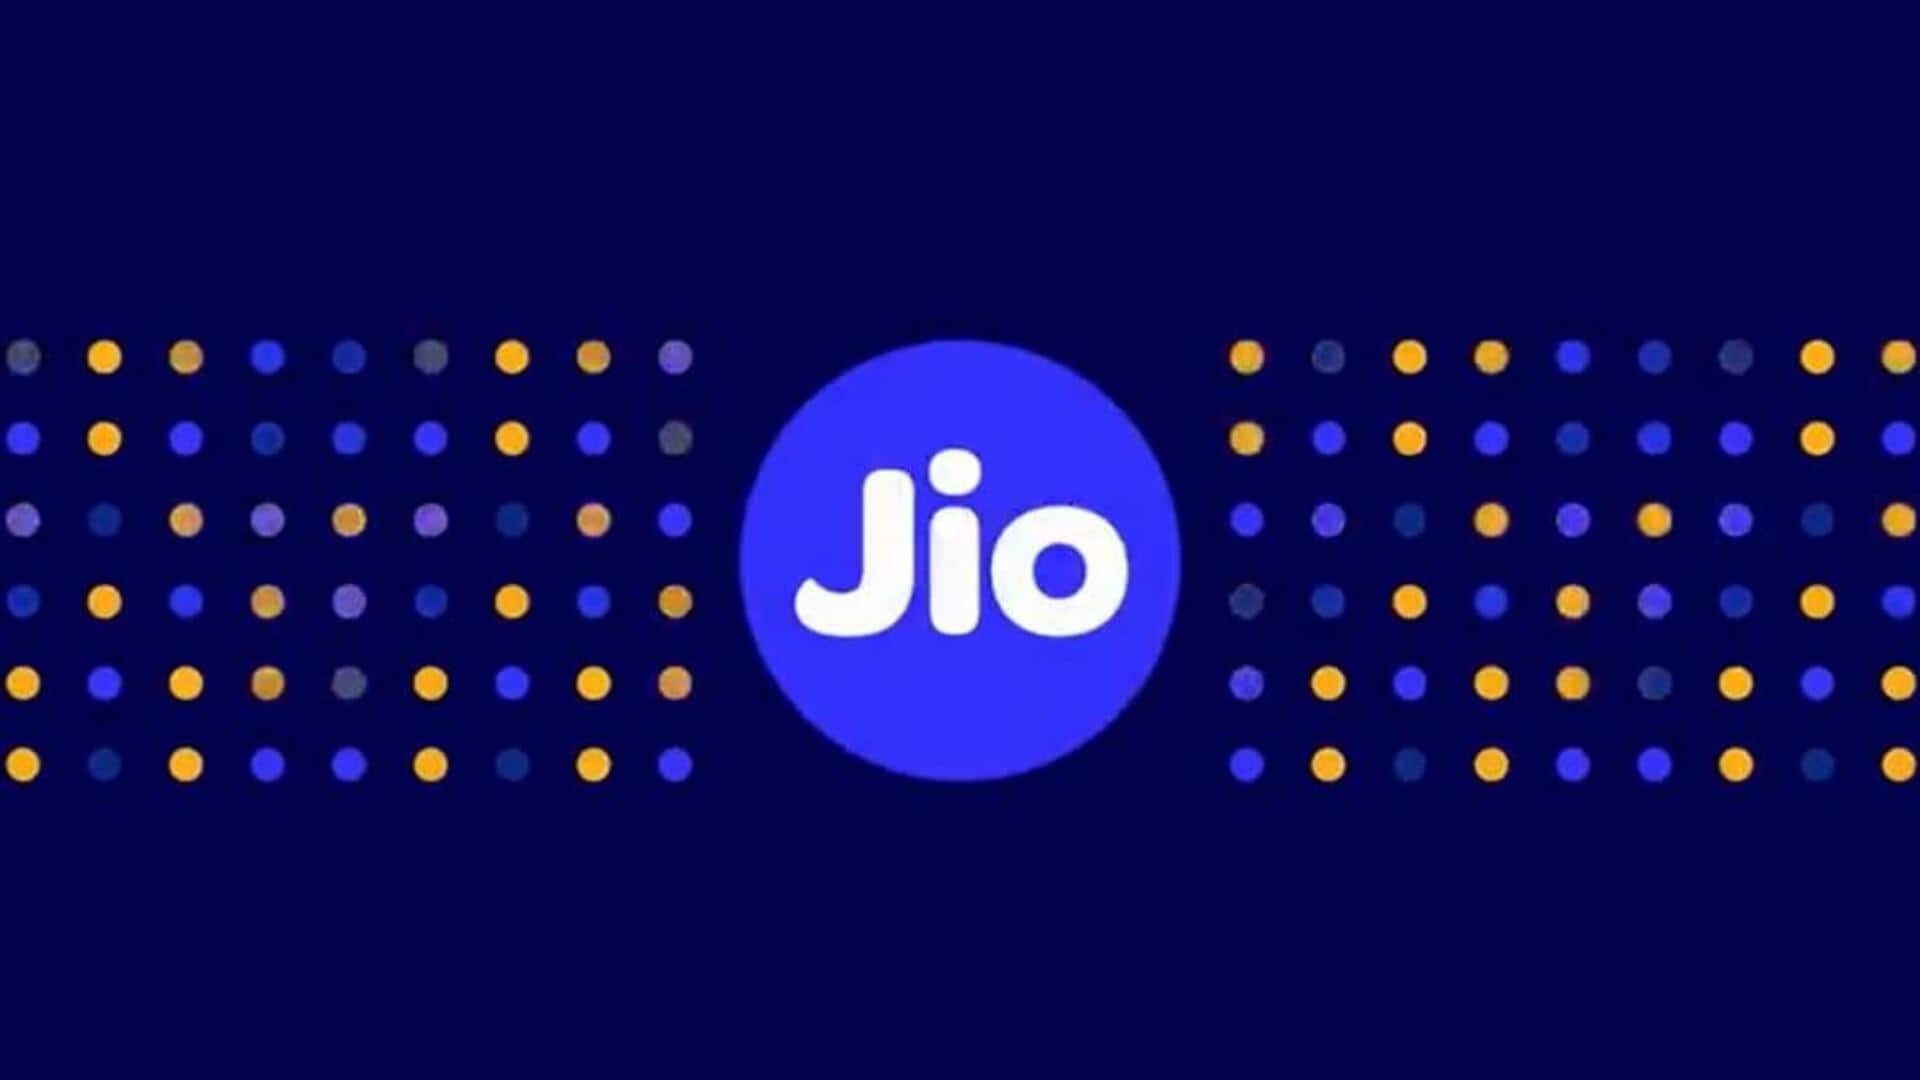 Jio phone wallpaper by sourav74396 - Download on ZEDGE™ | affd